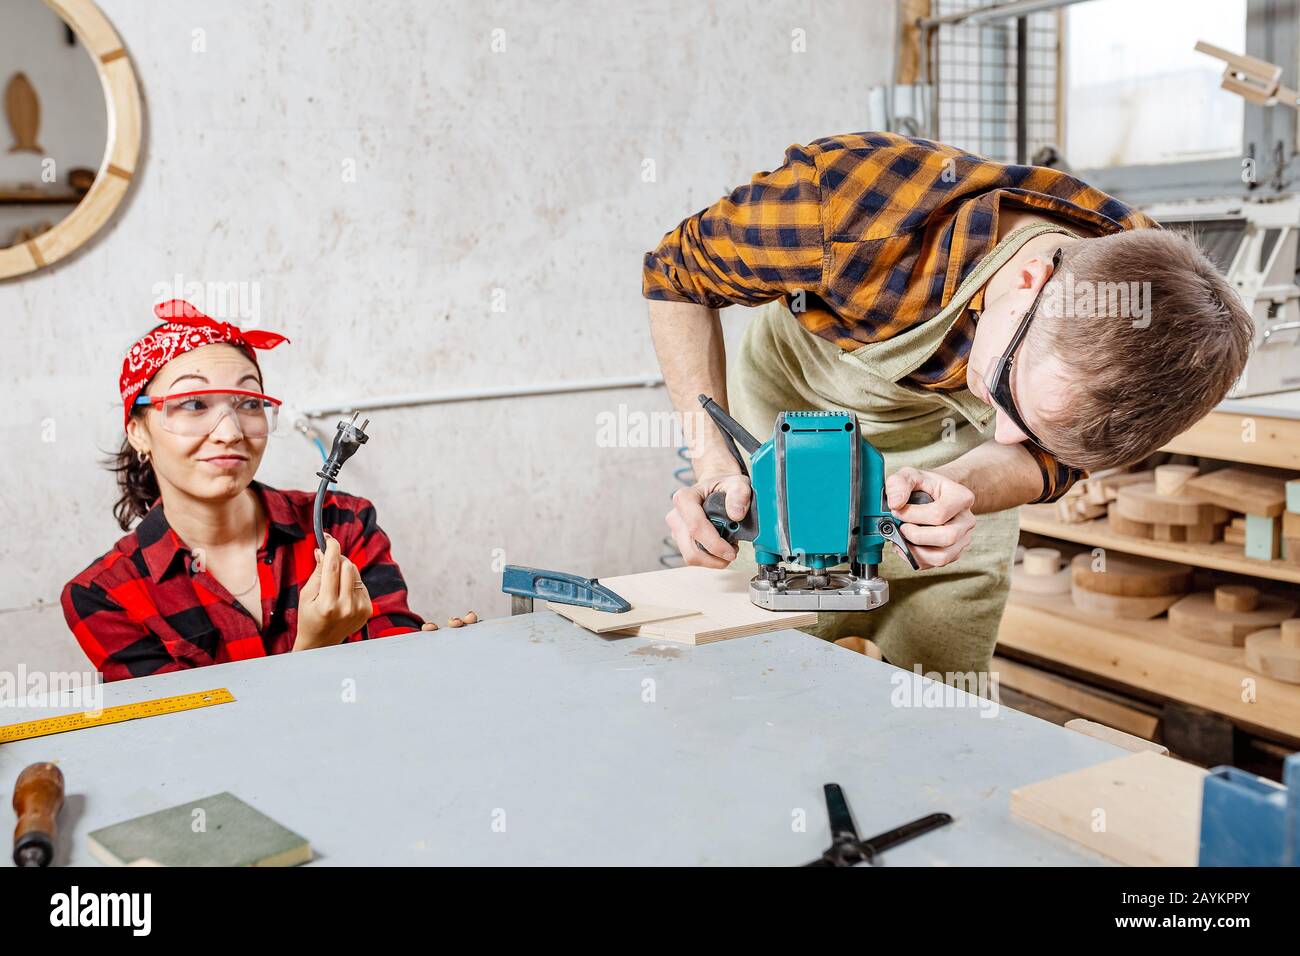 Male carpenter working with electric jigsaw and his girlfriend shows the plug socket. The concept of safety and humor Stock Photo